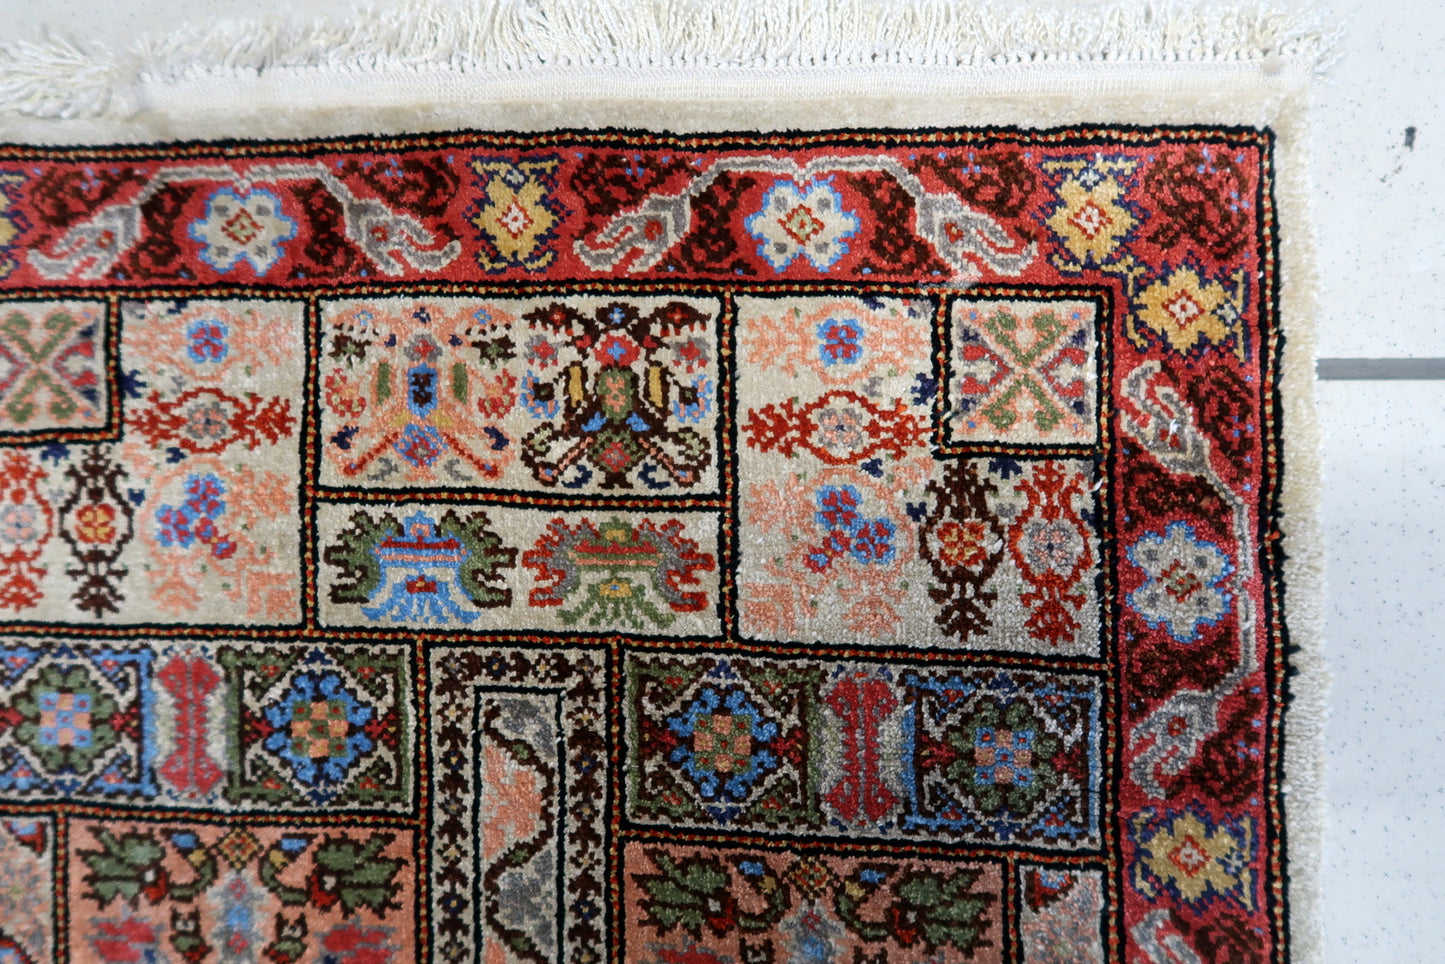 Back view of the vintage Tunisian silk rug highlighting its craftsmanship and size